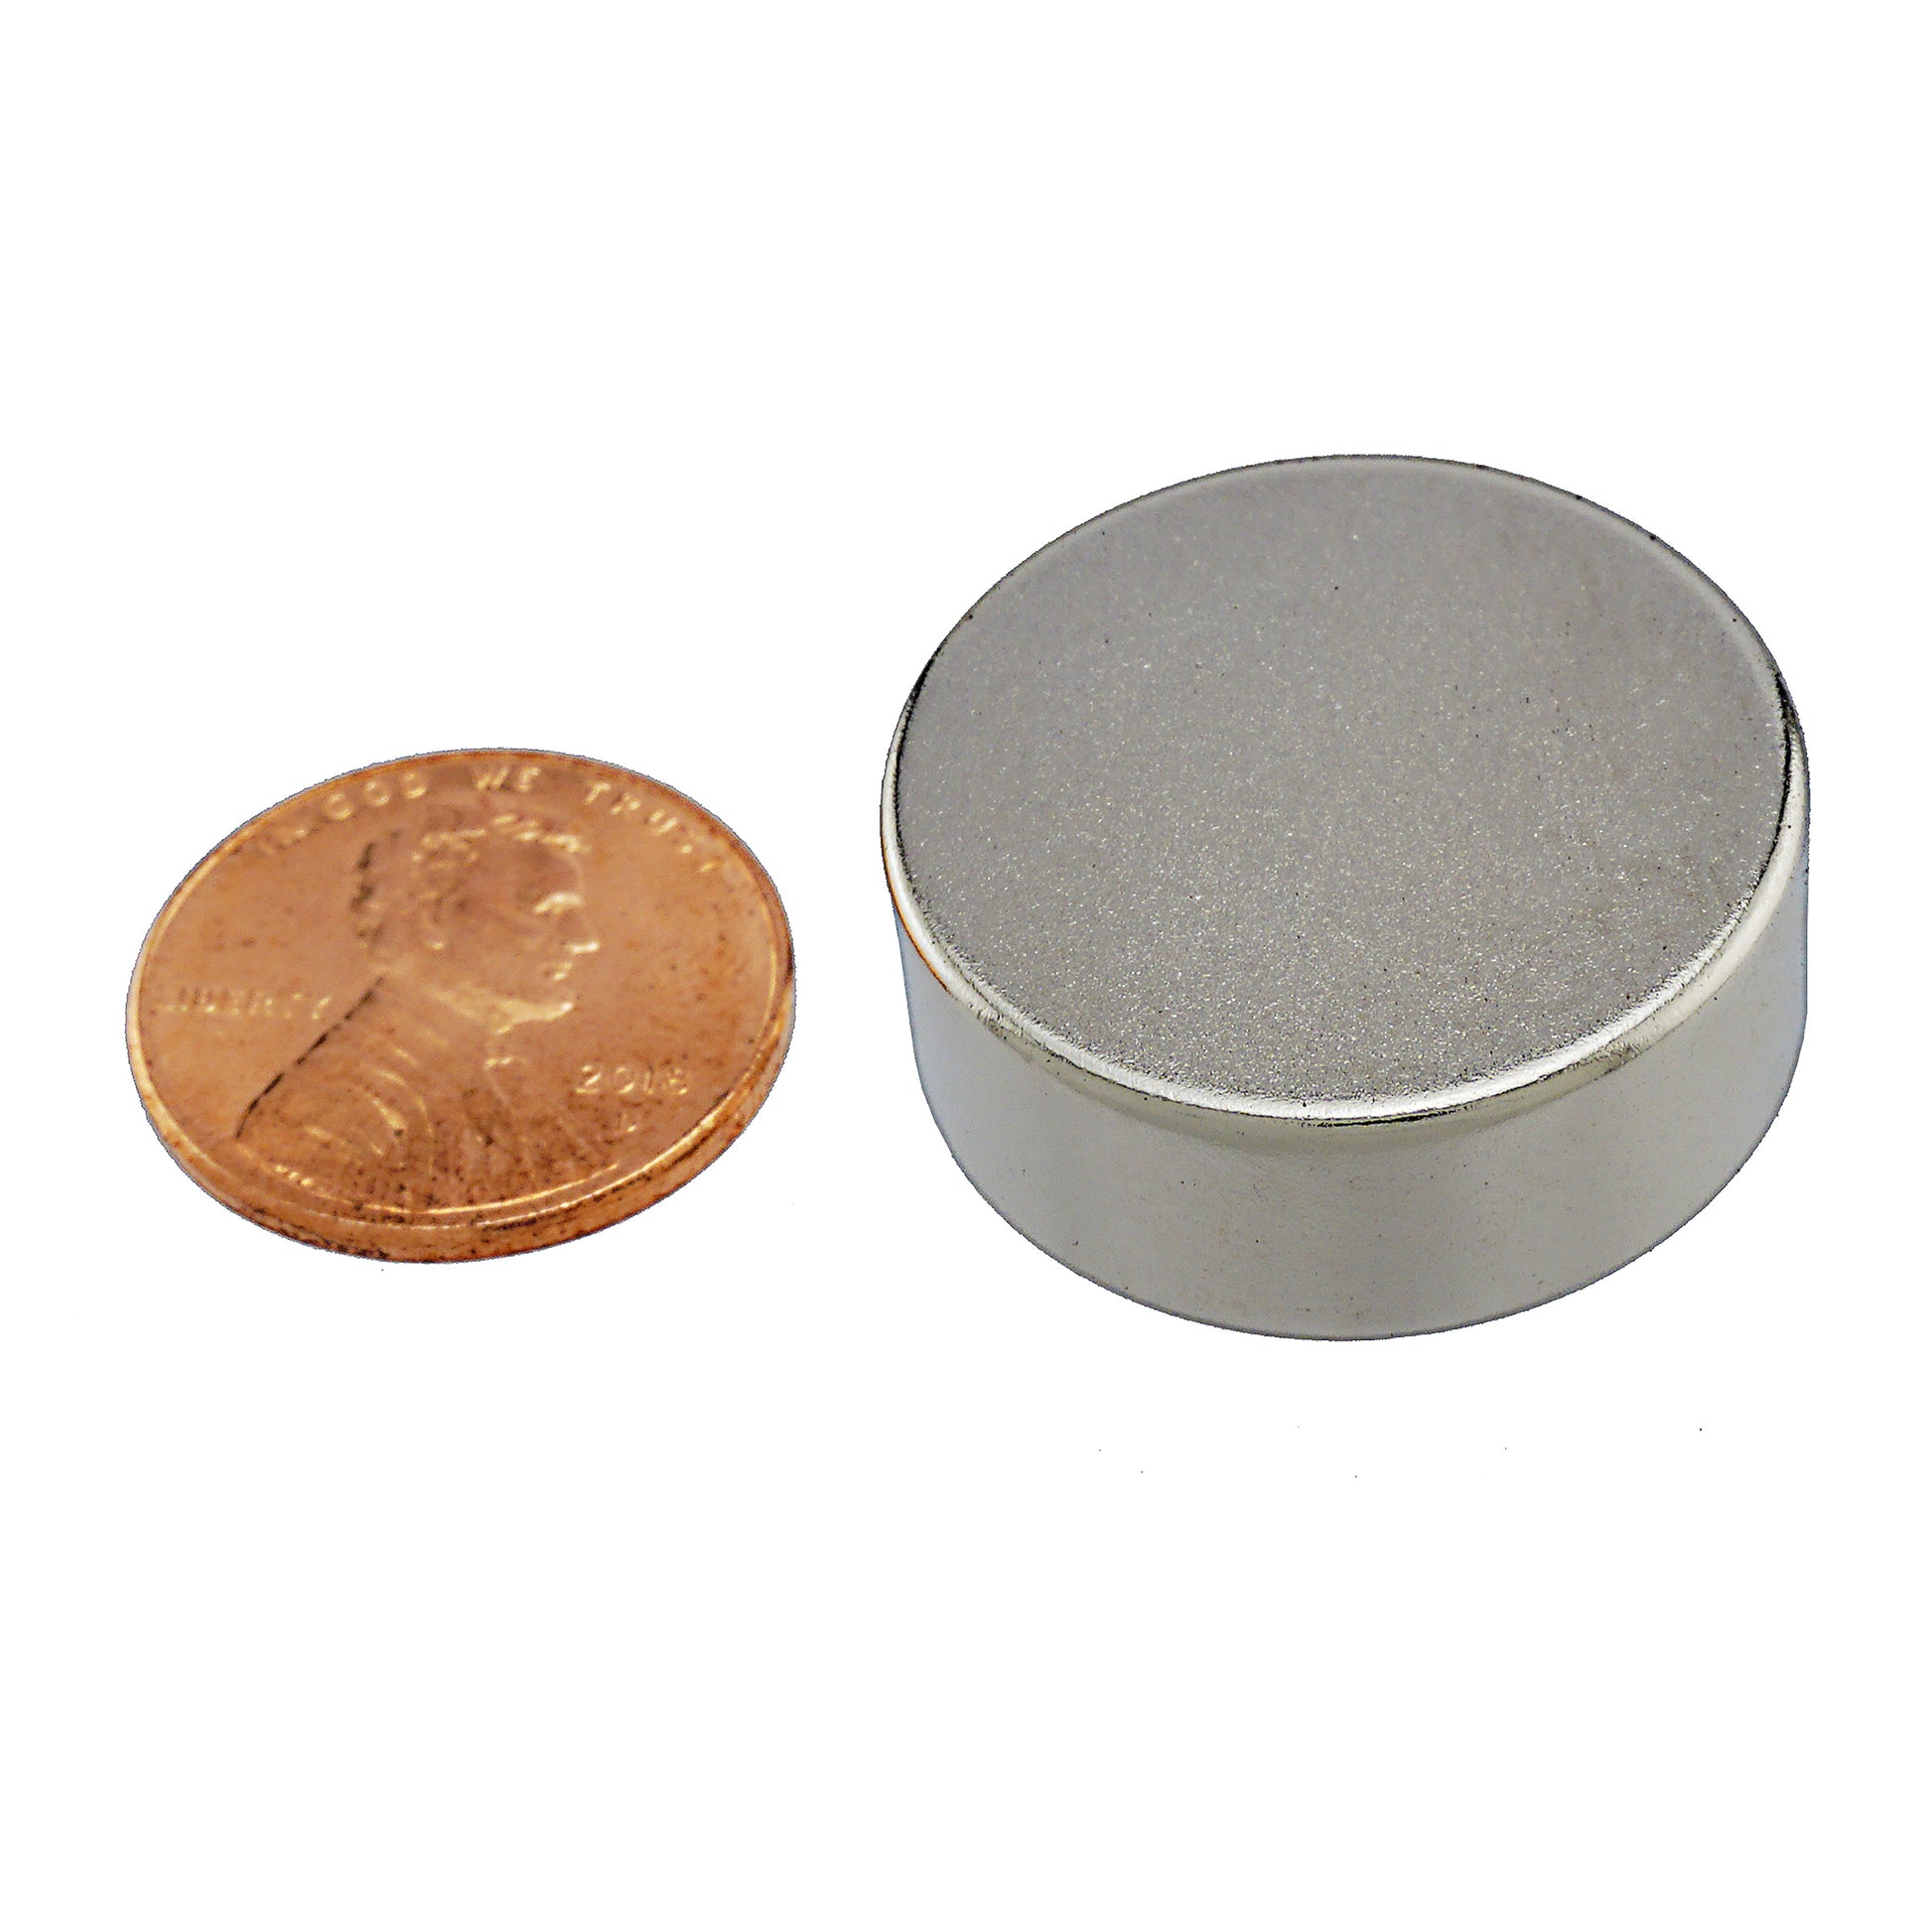 Load image into Gallery viewer, ND150N-35 Neodymium Disc Magnet - Compared to Penny for Size Reference